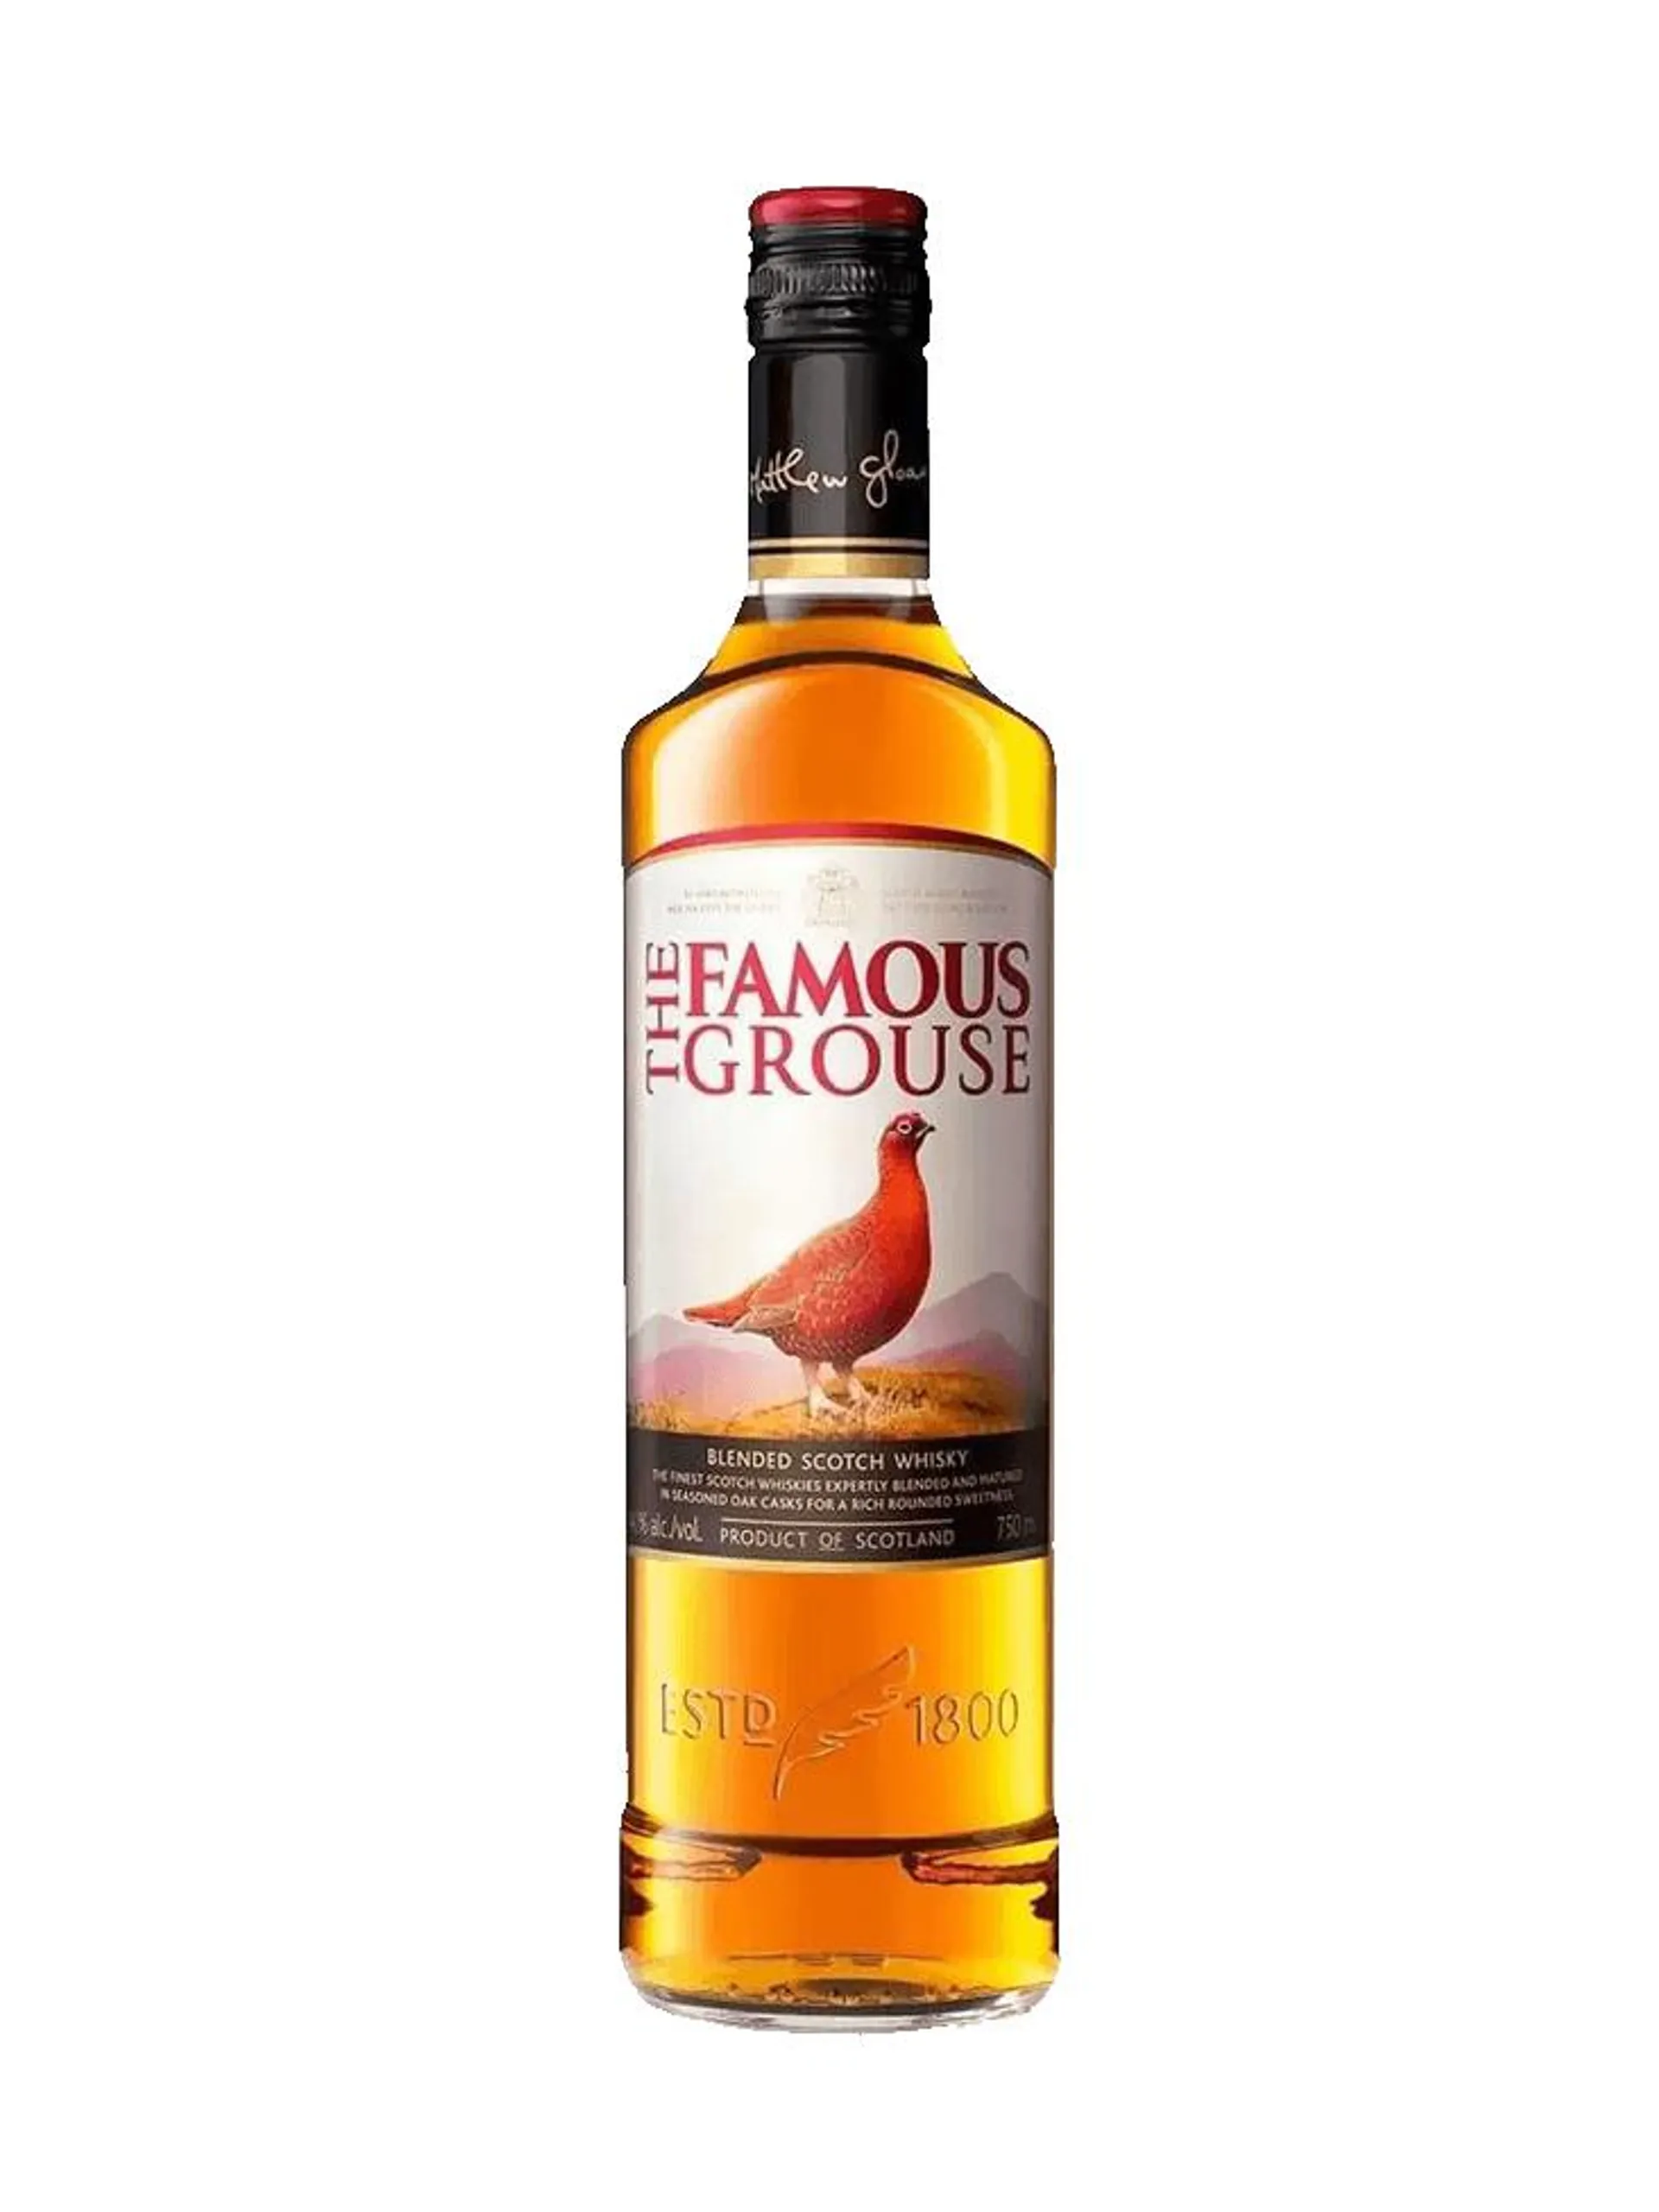 WHISKY FAMOUS GROUSE 750ML